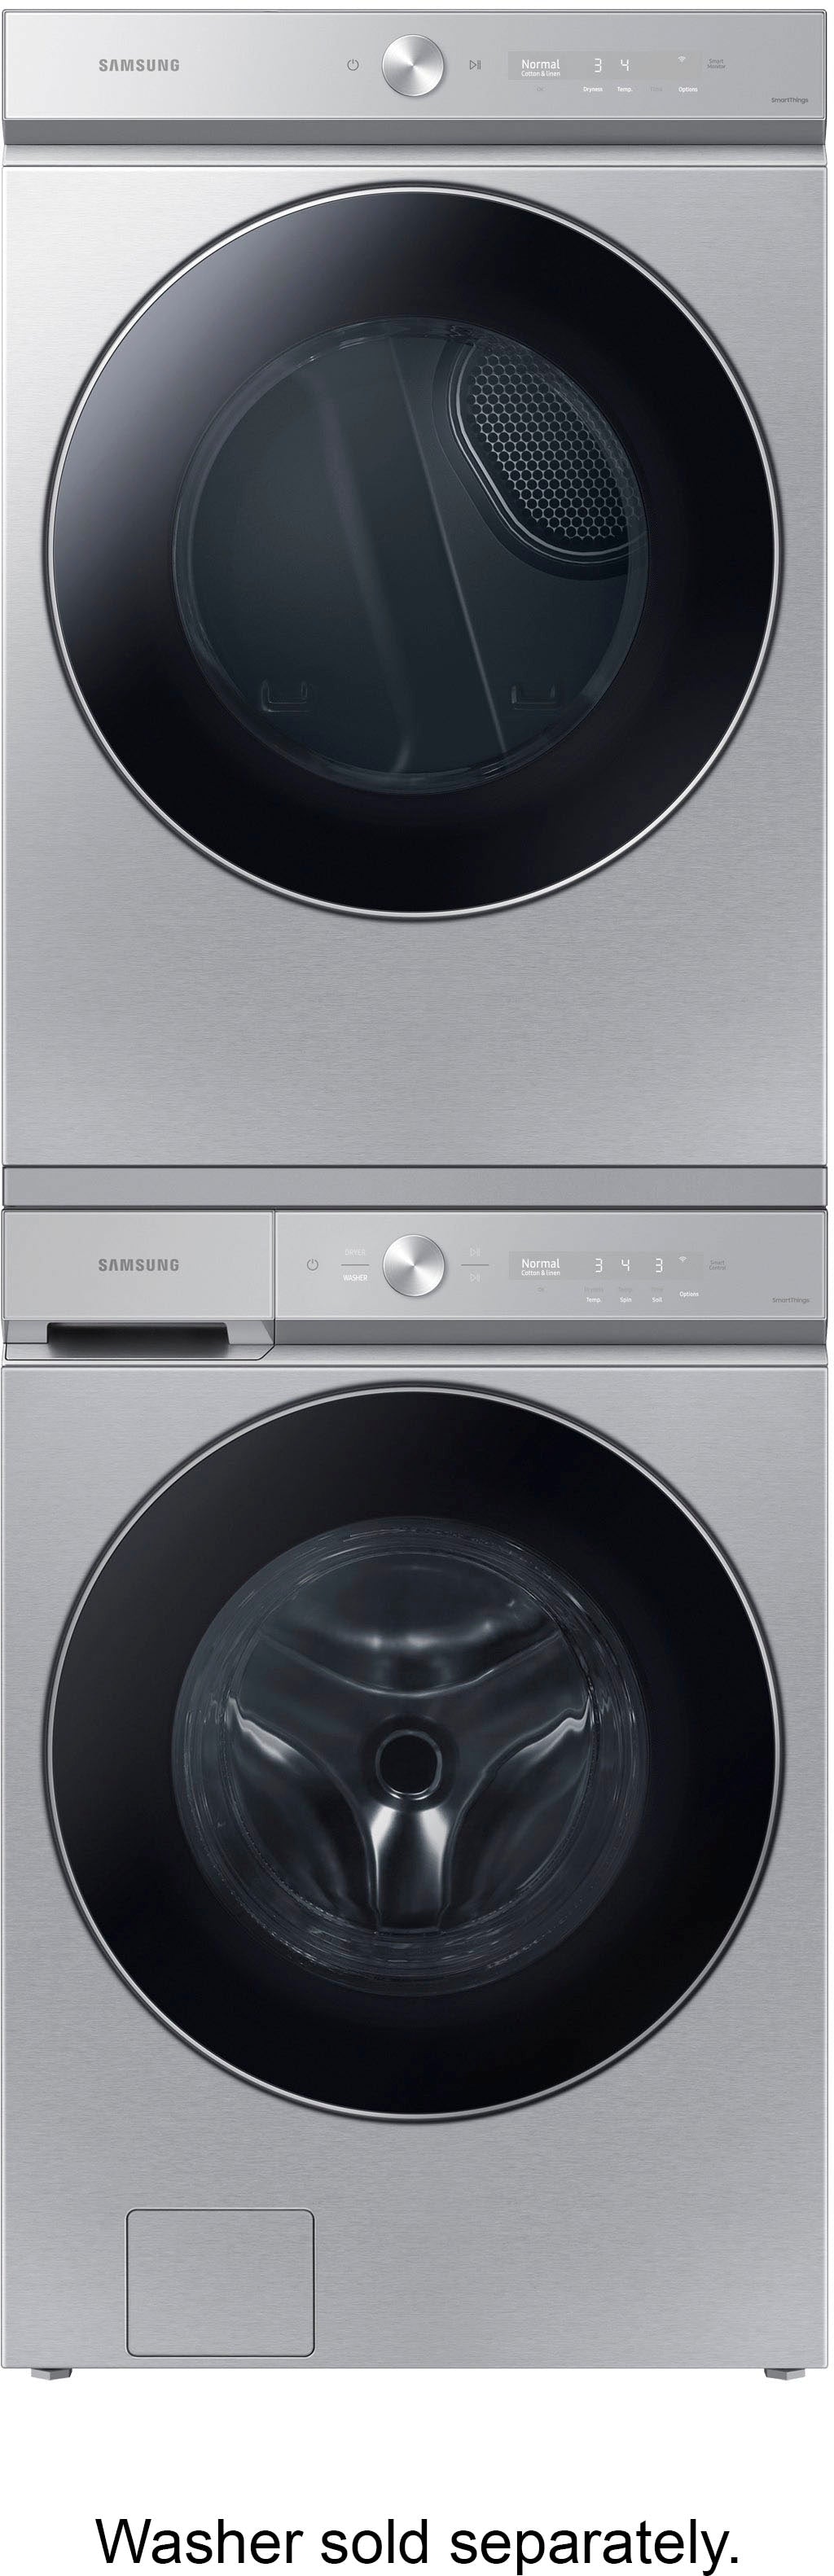 Samsung - Bespoke 7.6 cu. ft. Ultra Capacity Gas Dryer with AI Optimal Dry and Super Speed Dry - Silver steel_11